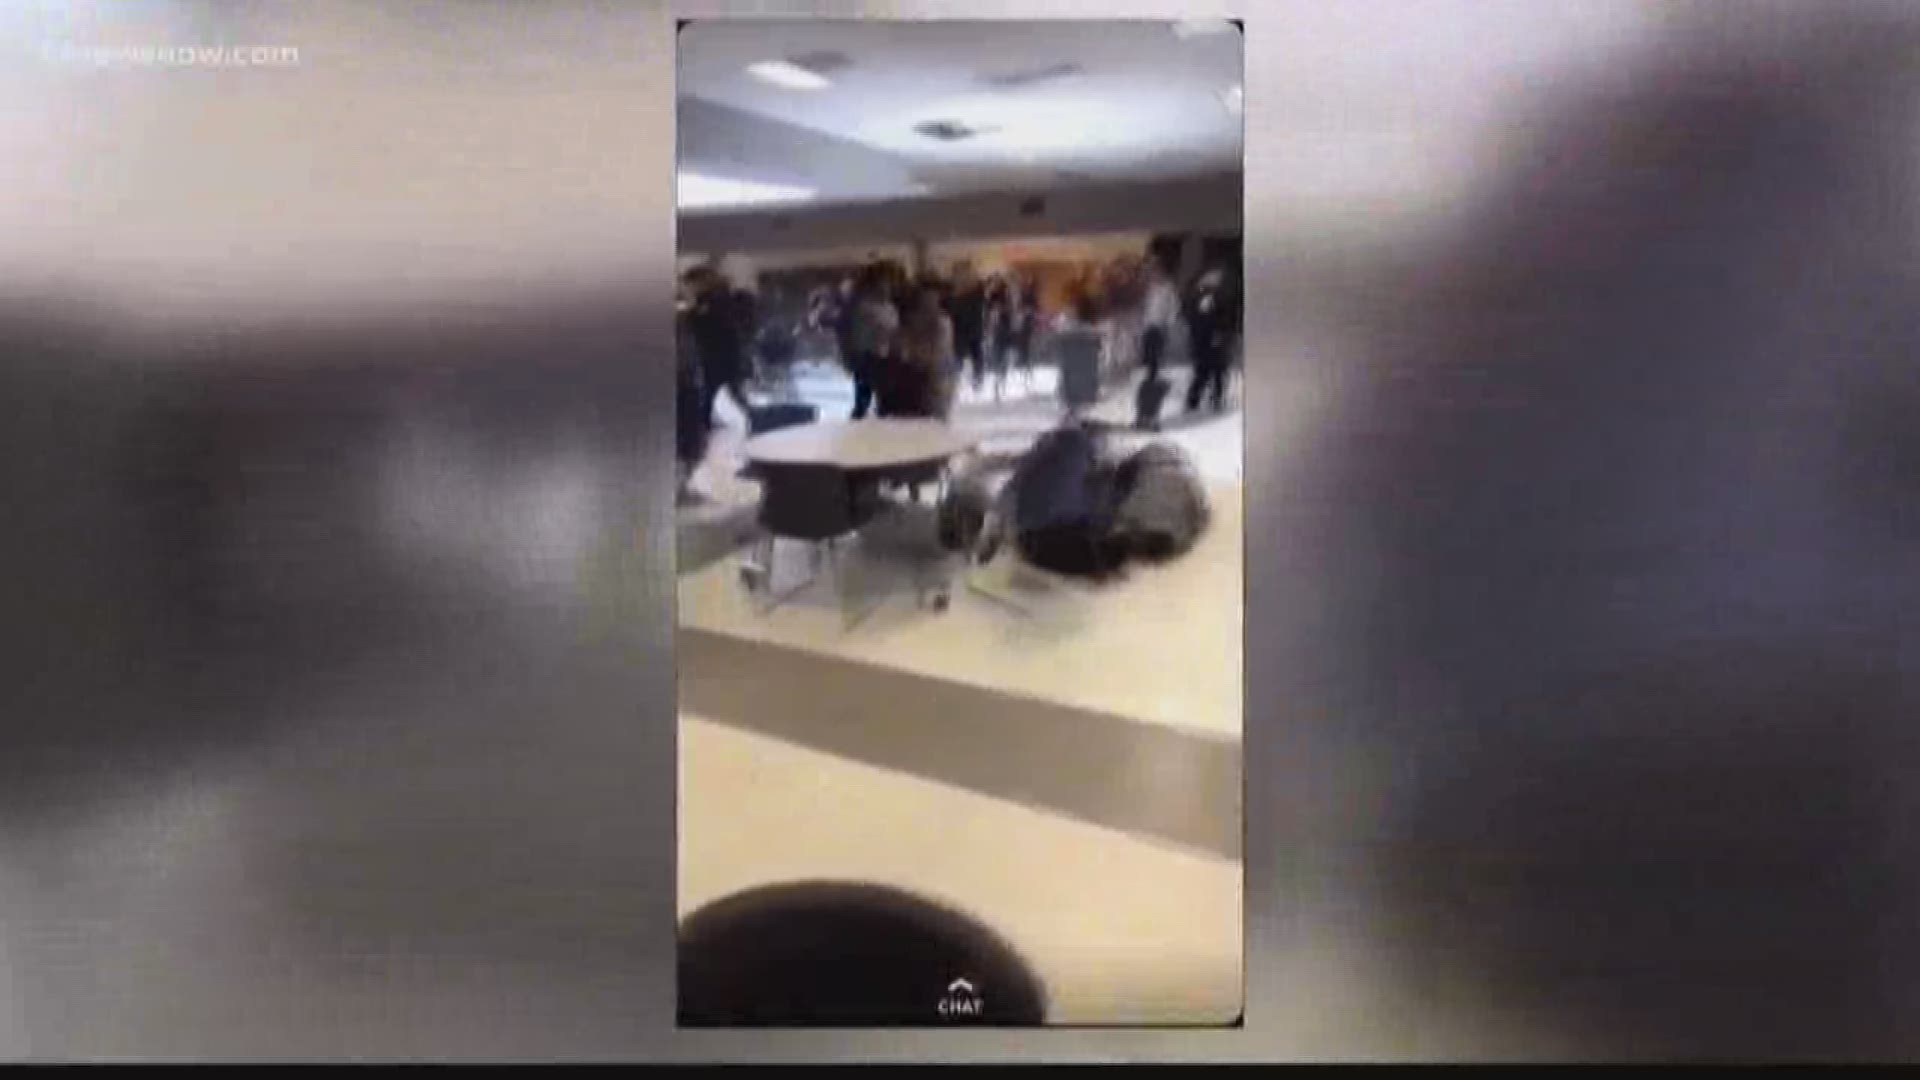 After videos of brawls at Norview High School hit social media and the news, parents reacted.